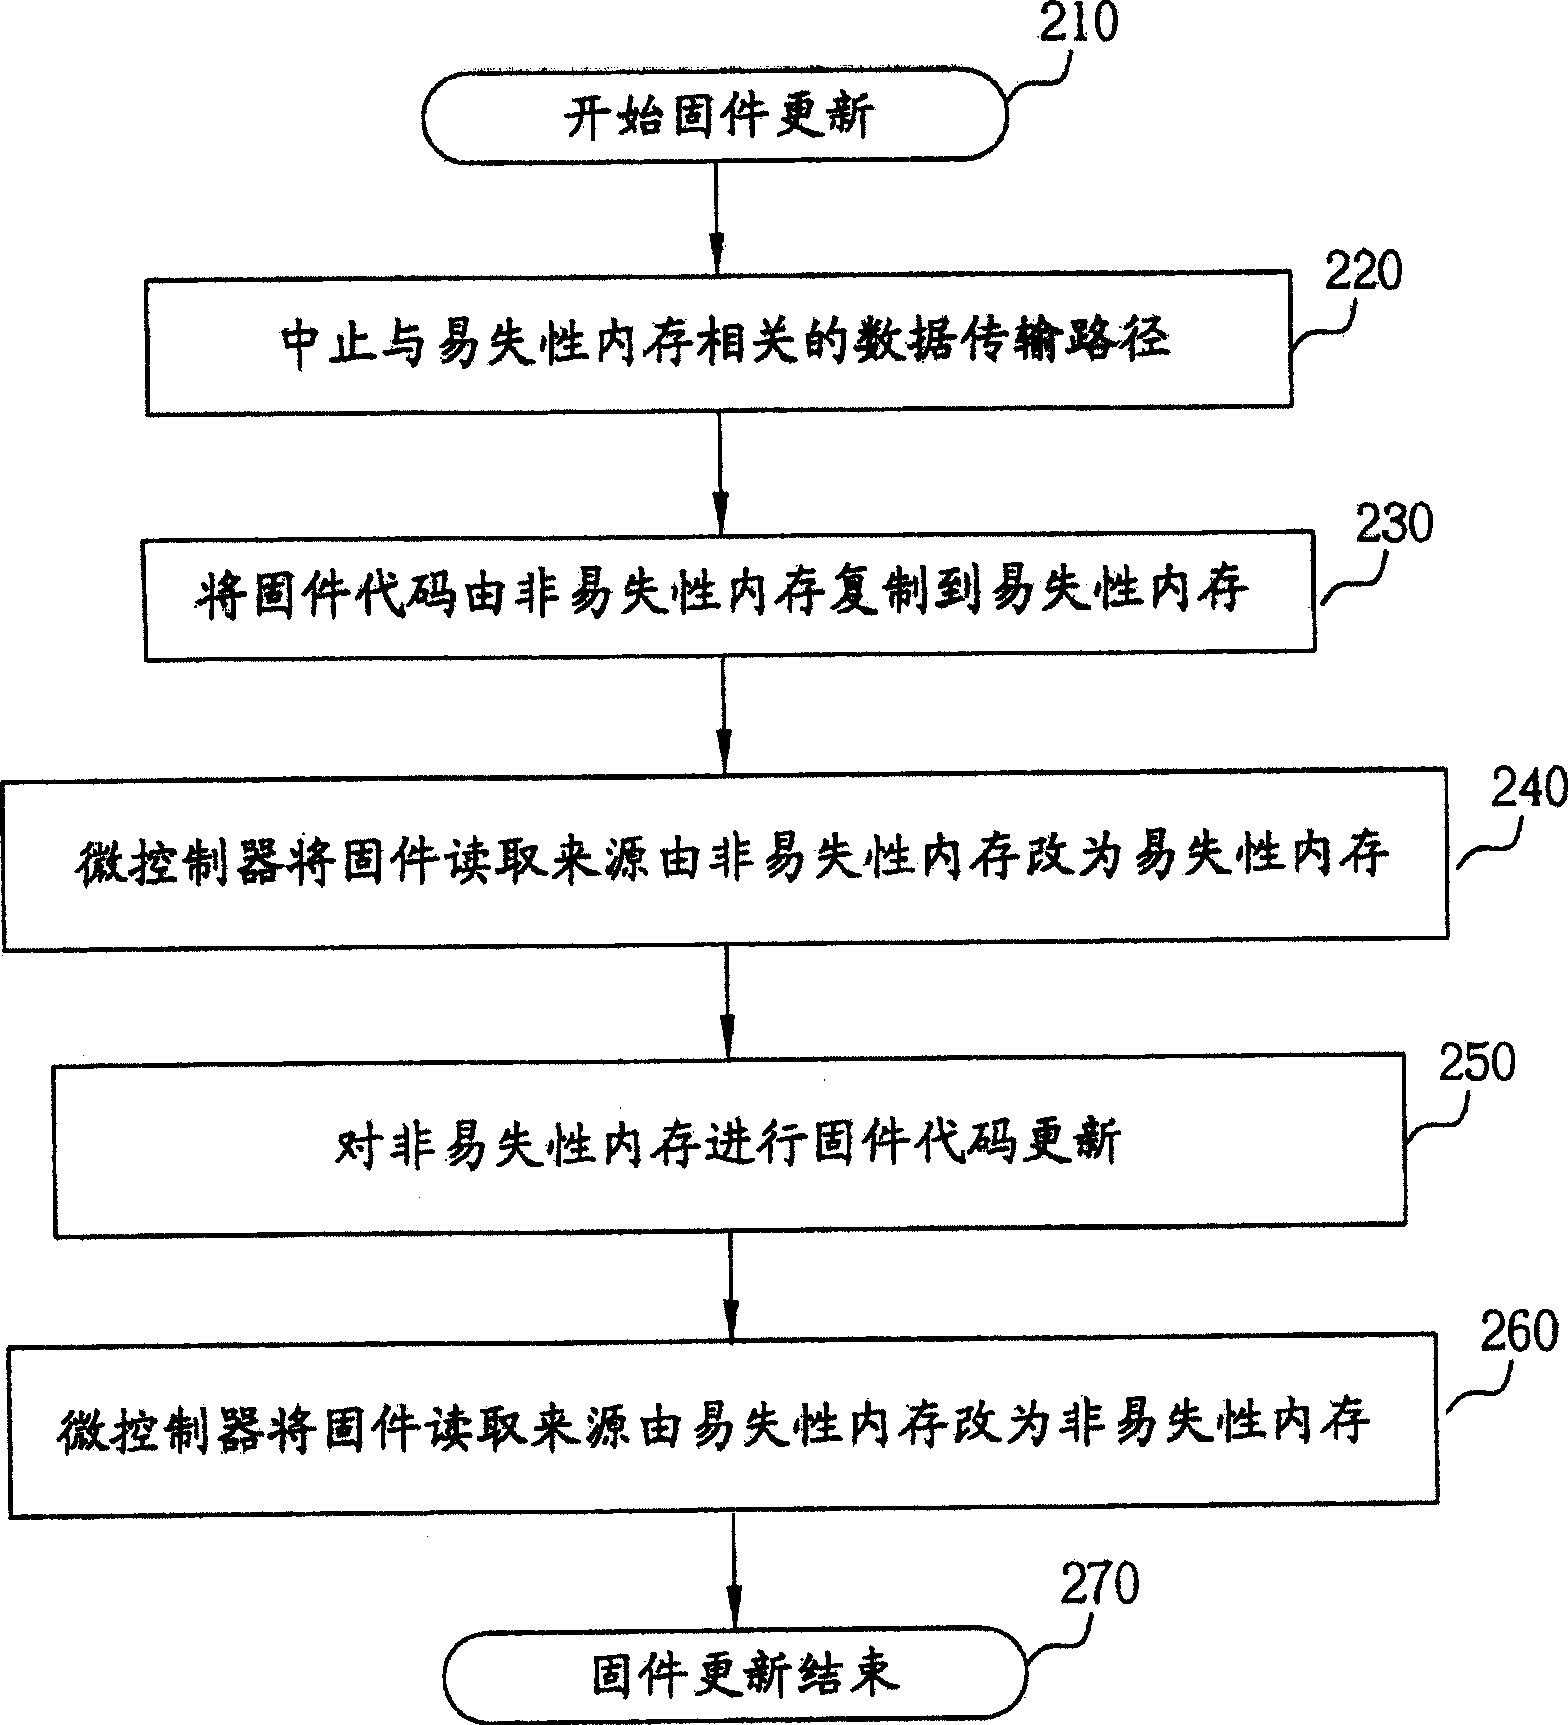 Method and apparatus for updating firmware